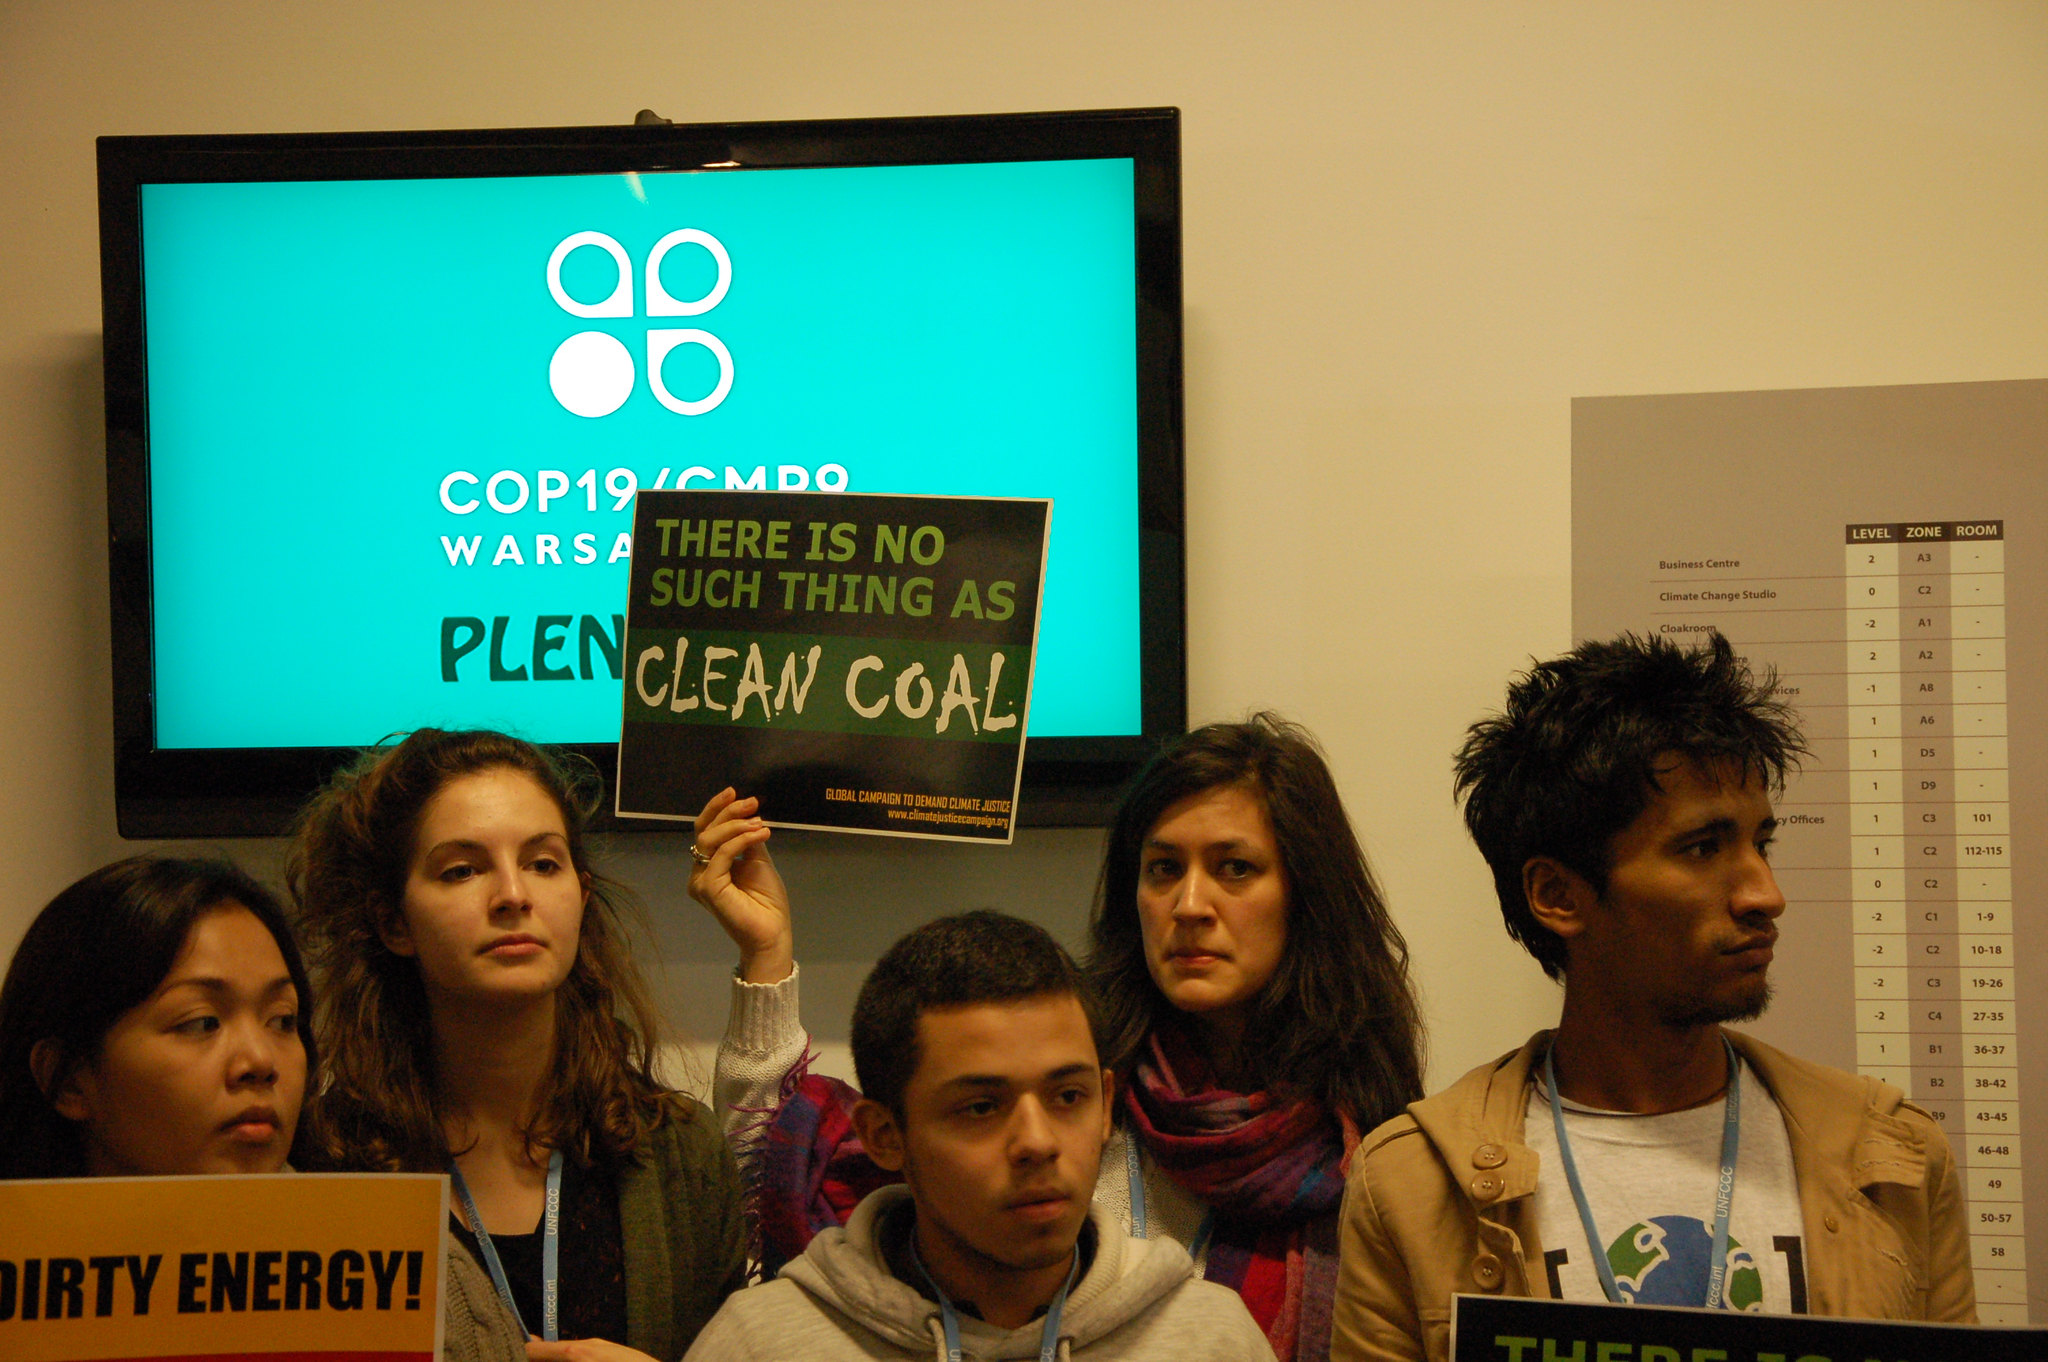 A group of young people hold a sign that says, "No coal is clean coal".